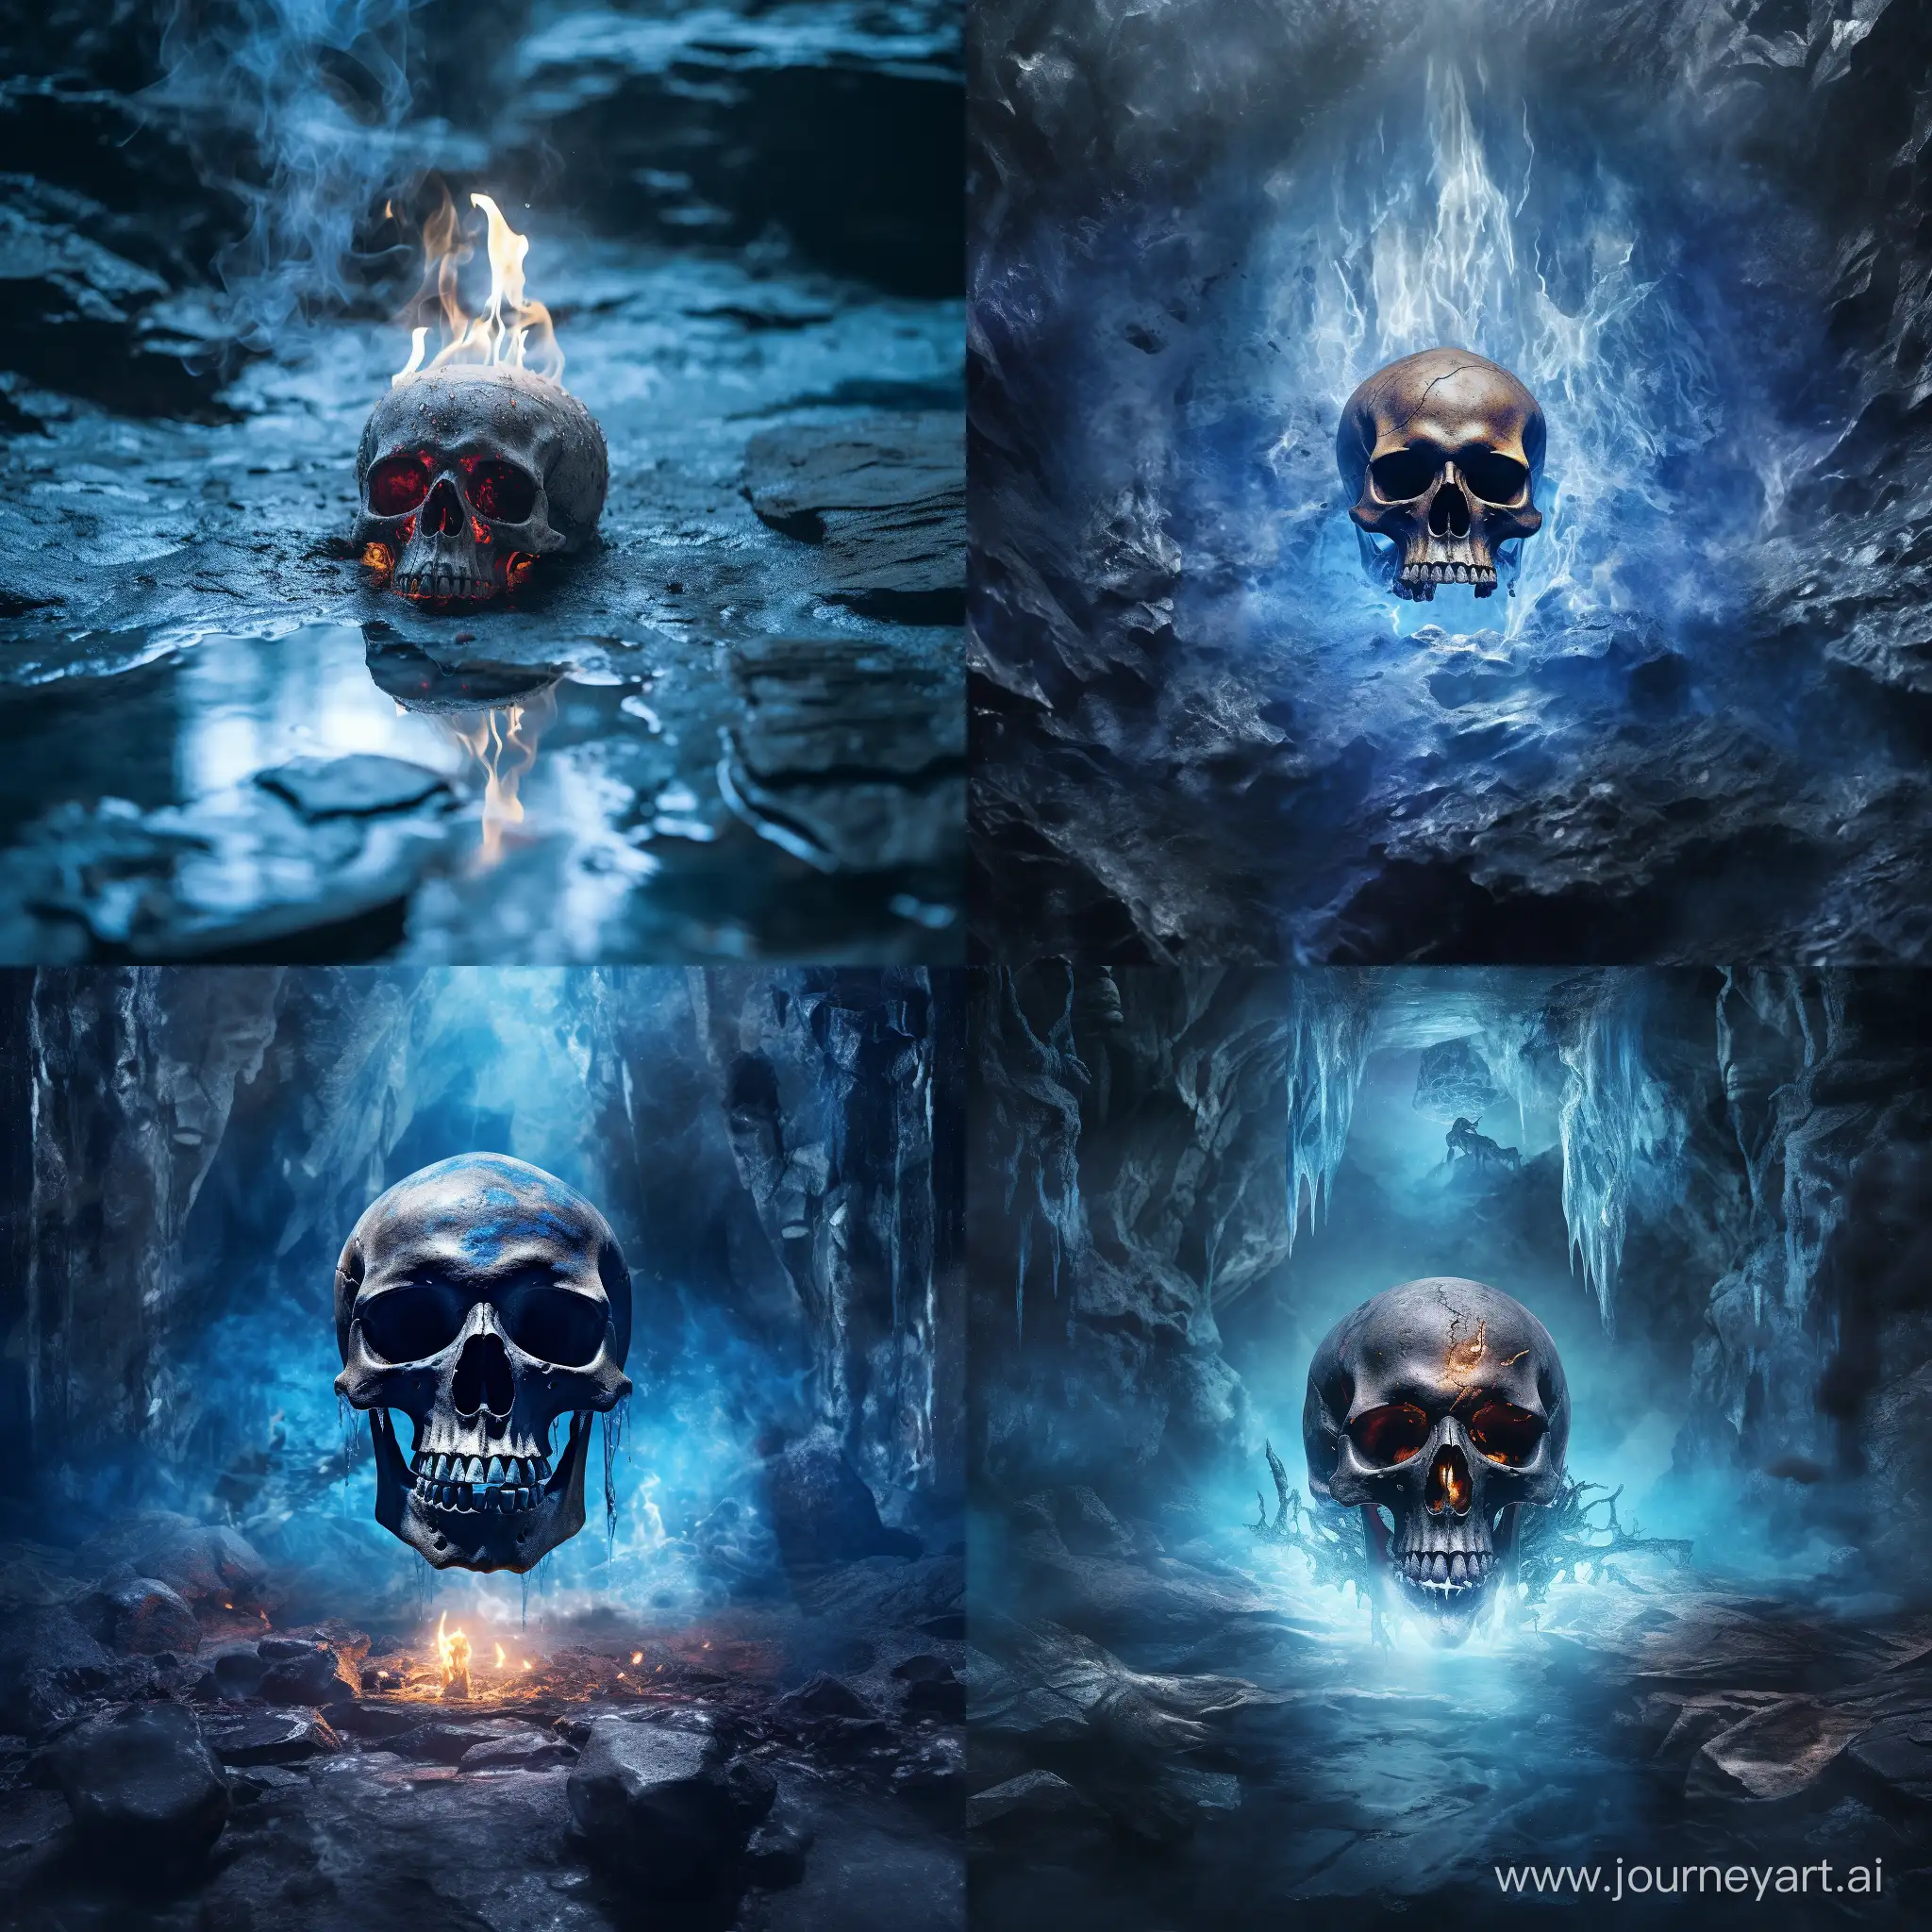 Ethereal-Blue-Flame-Skull-in-Icy-Cave